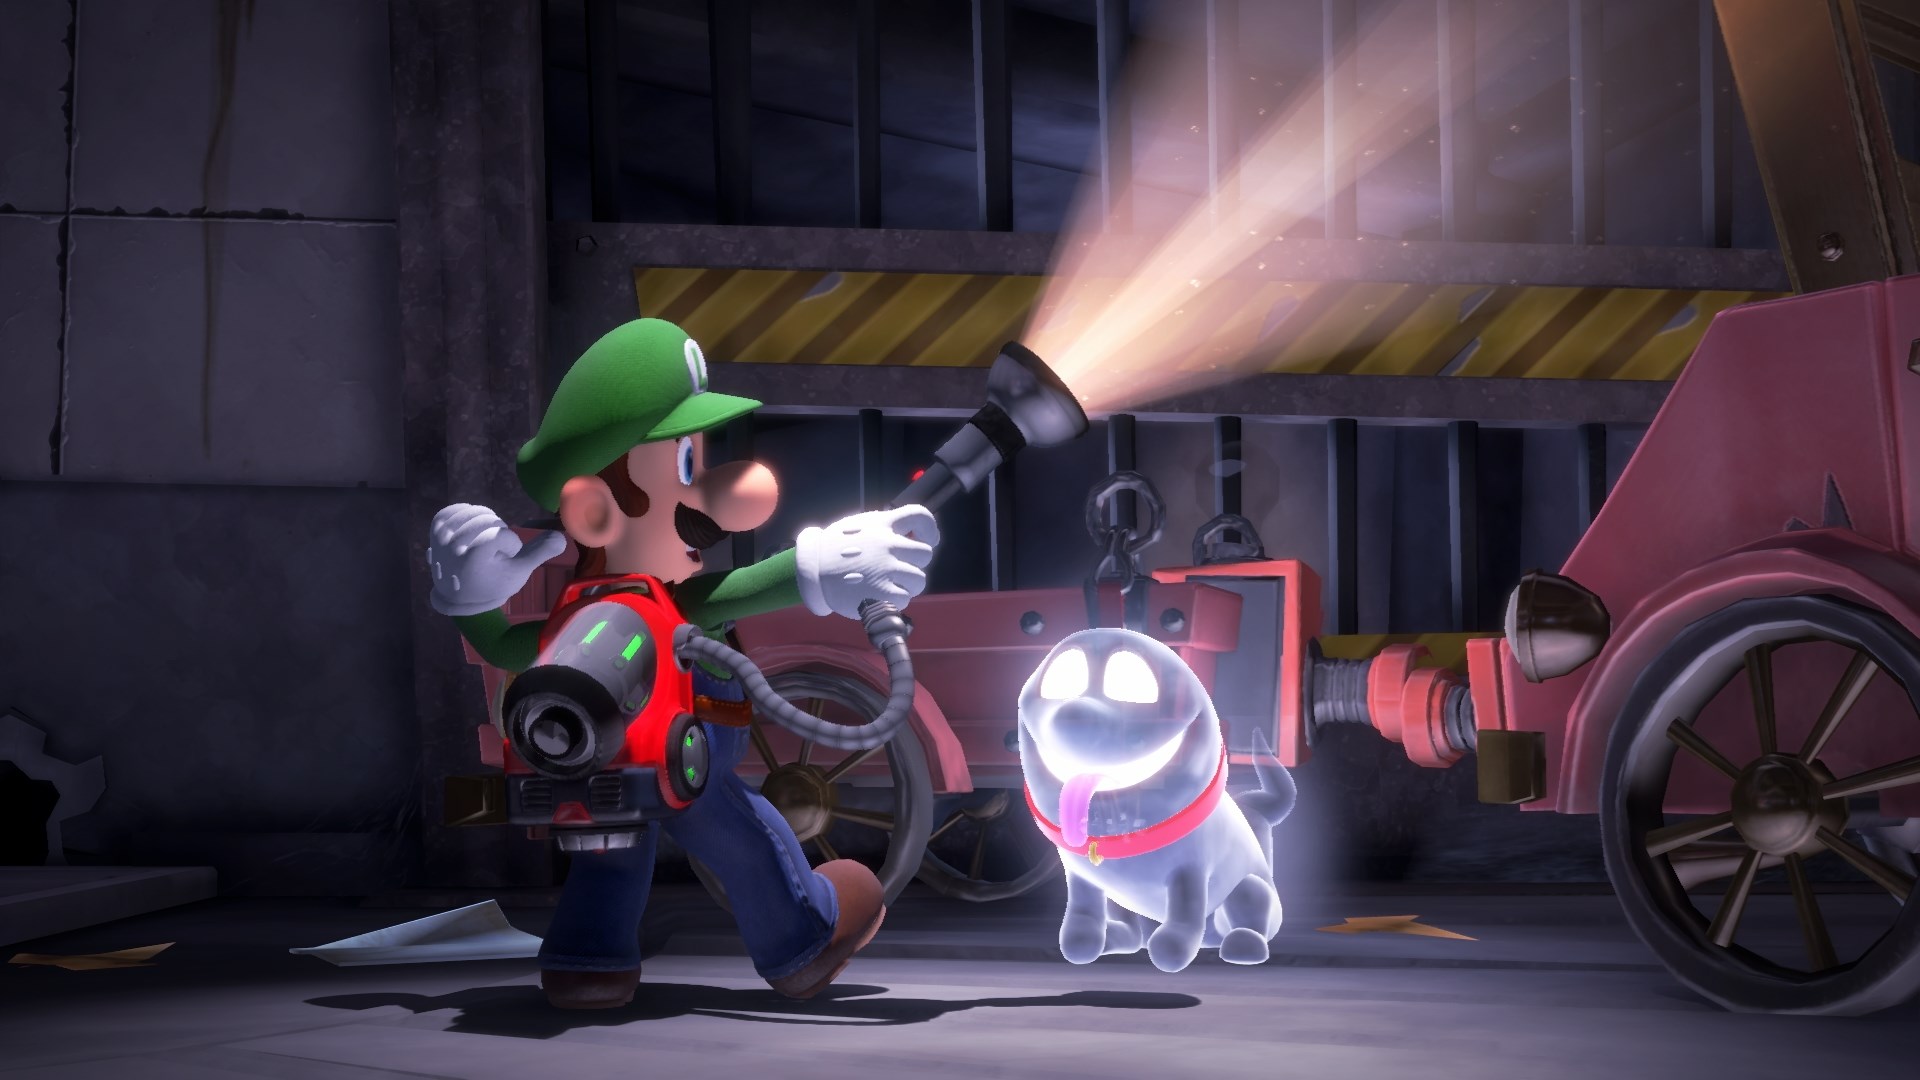 A screenshot from Luigi's Mansion 3, showing Luigi and Polterpup